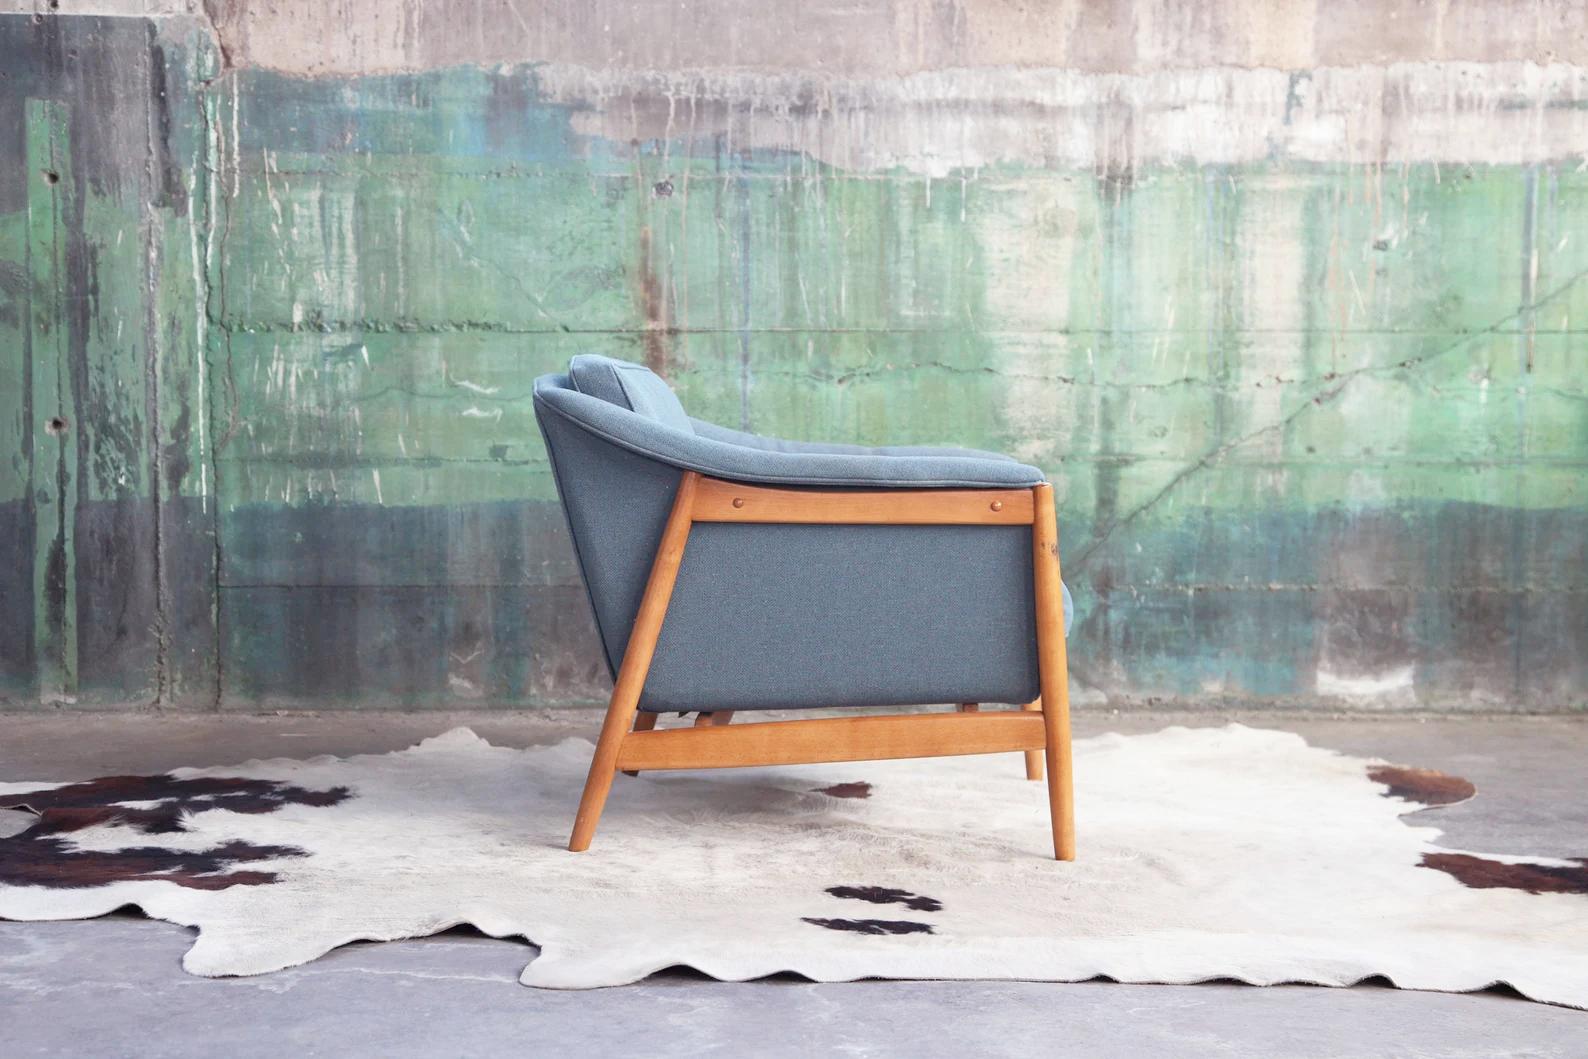 DUX Folke Ohlsson Midcentury Danish Modern Lounge Chair In Good Condition For Sale In Basel, BS